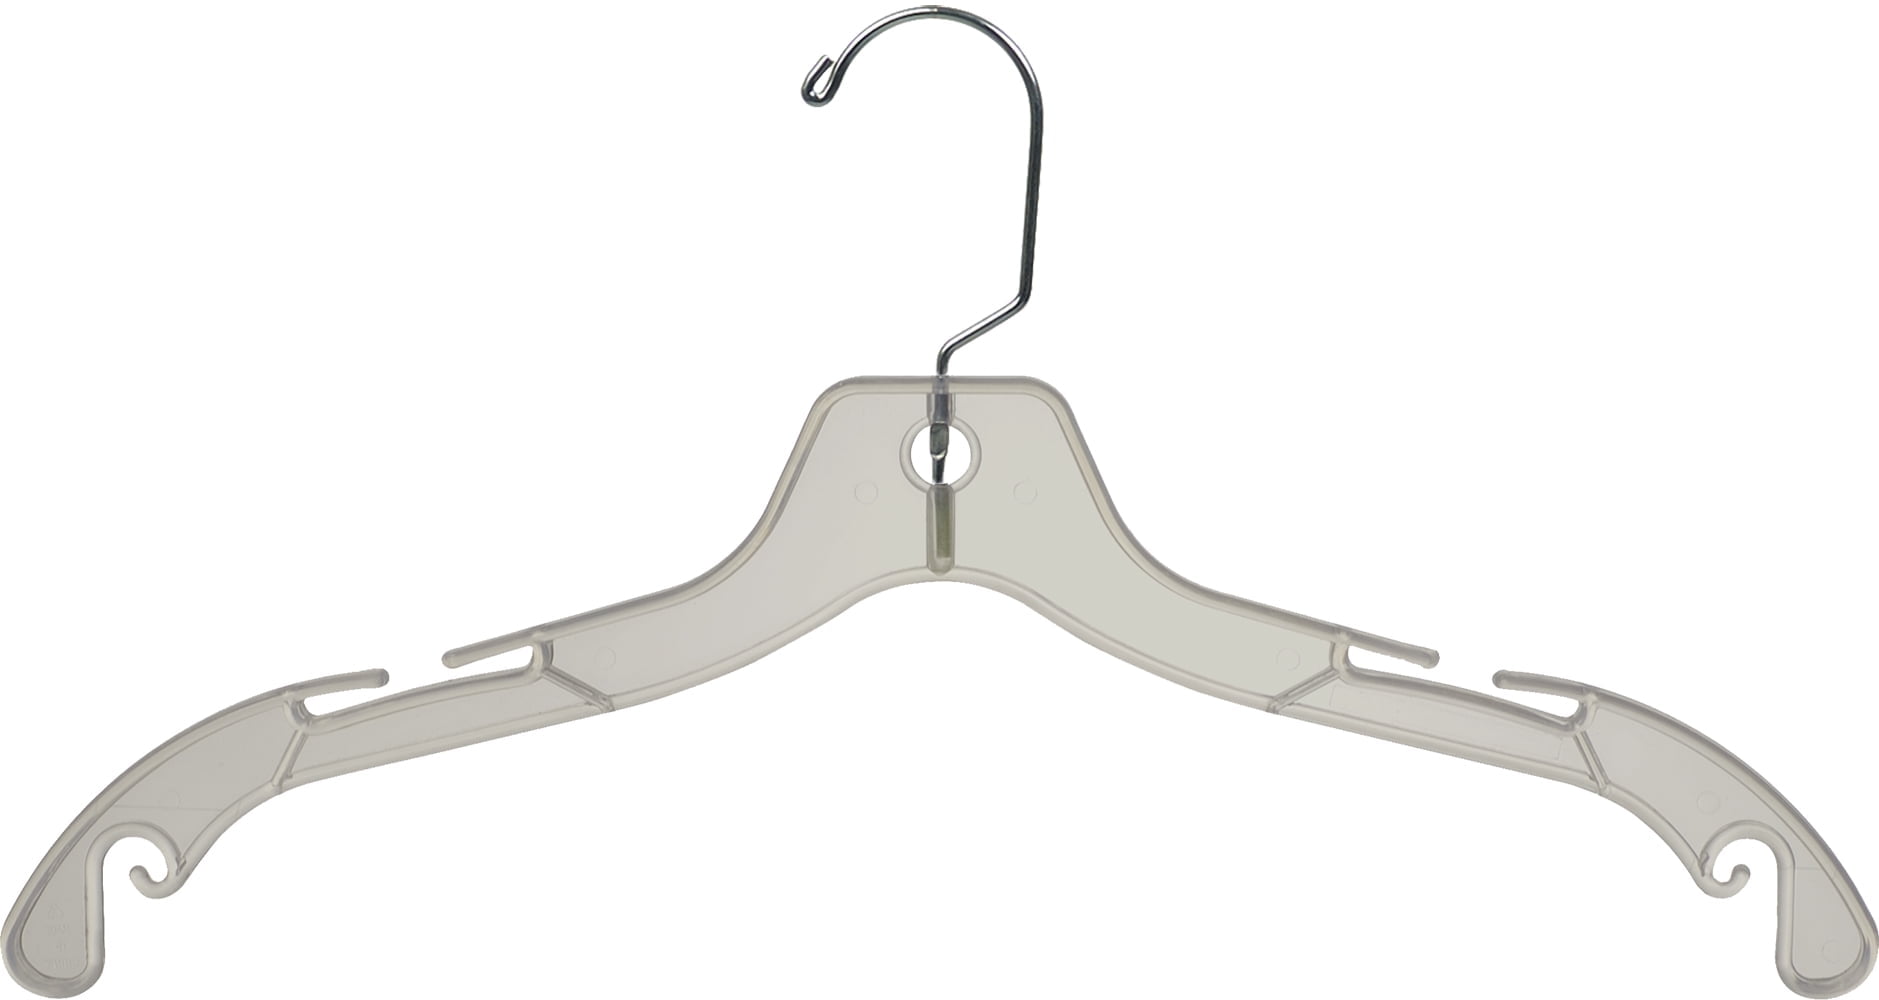 Clear Plastic Kids Combo Clothes Hanger With Chrome Hardware - 14 For Sale